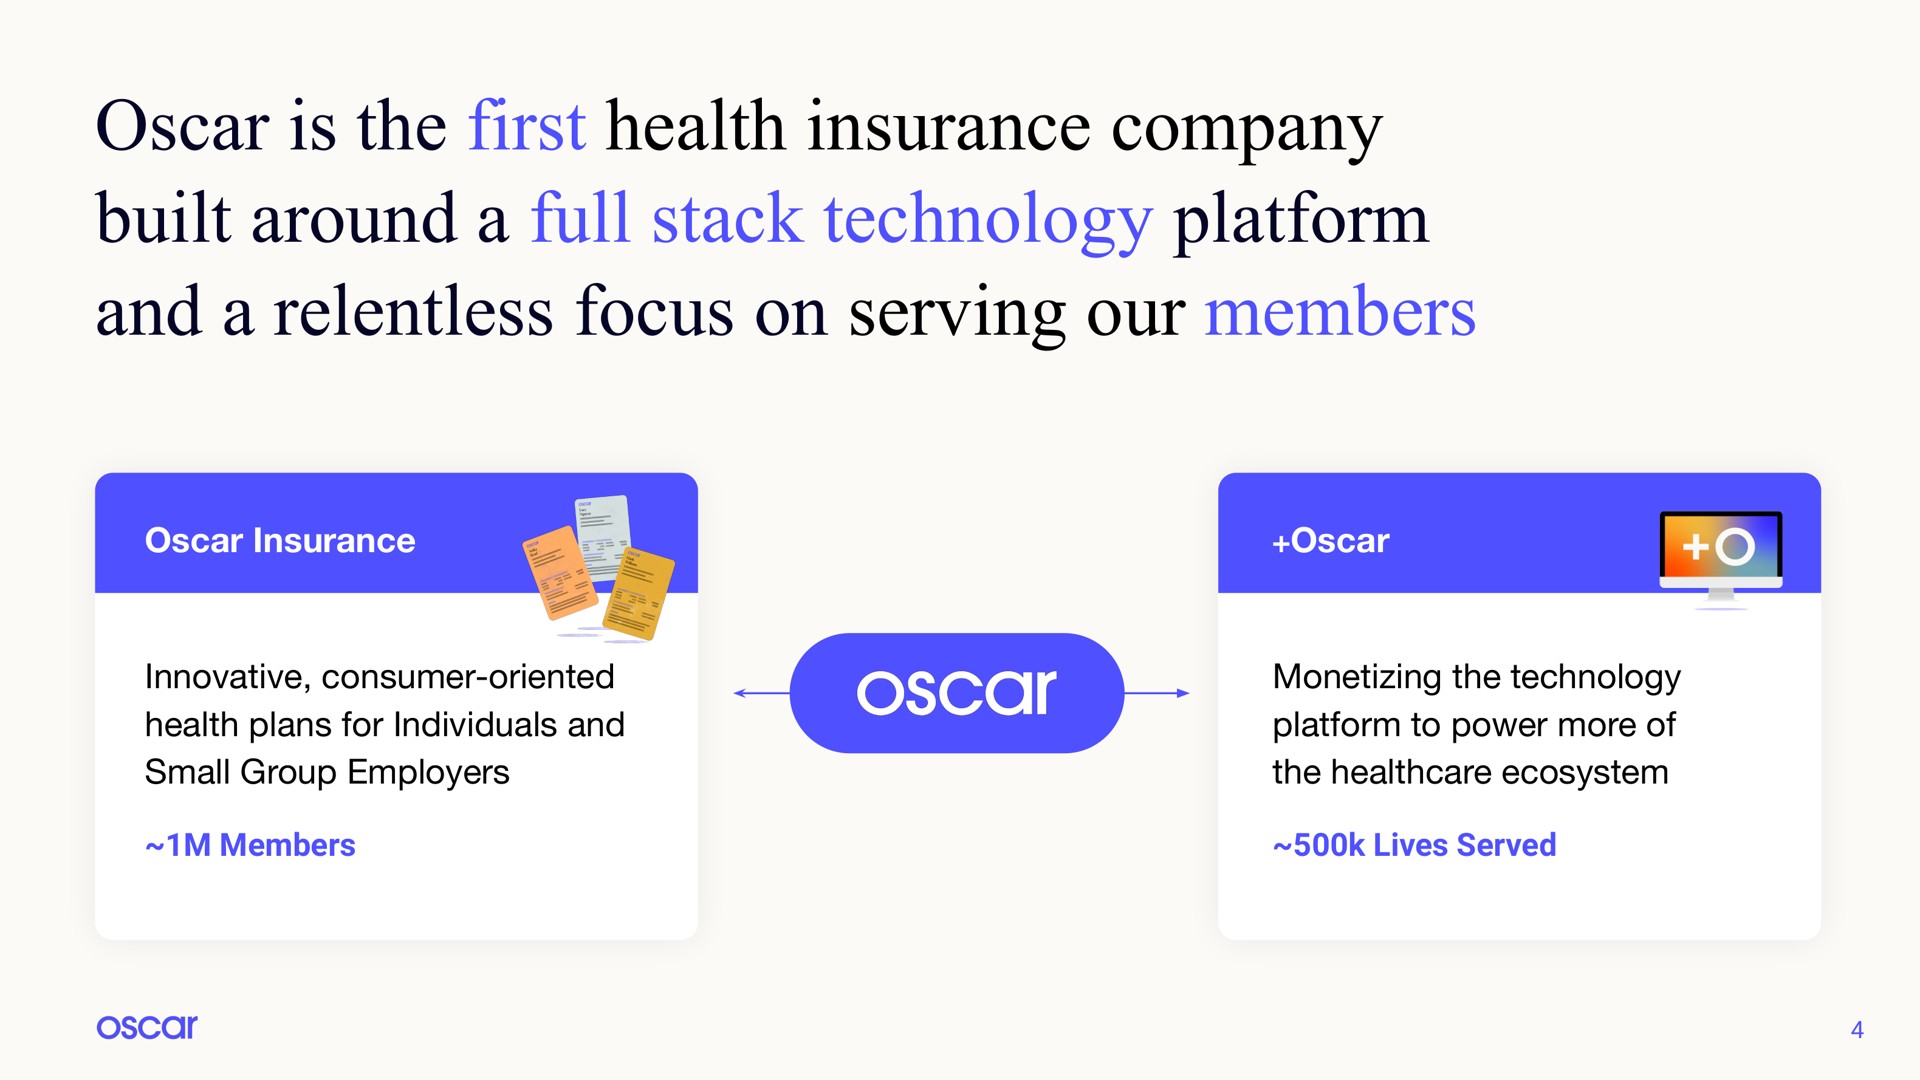 is the first health insurance company built around a full stack technology platform and a relentless focus on serving our members | Oscar Health